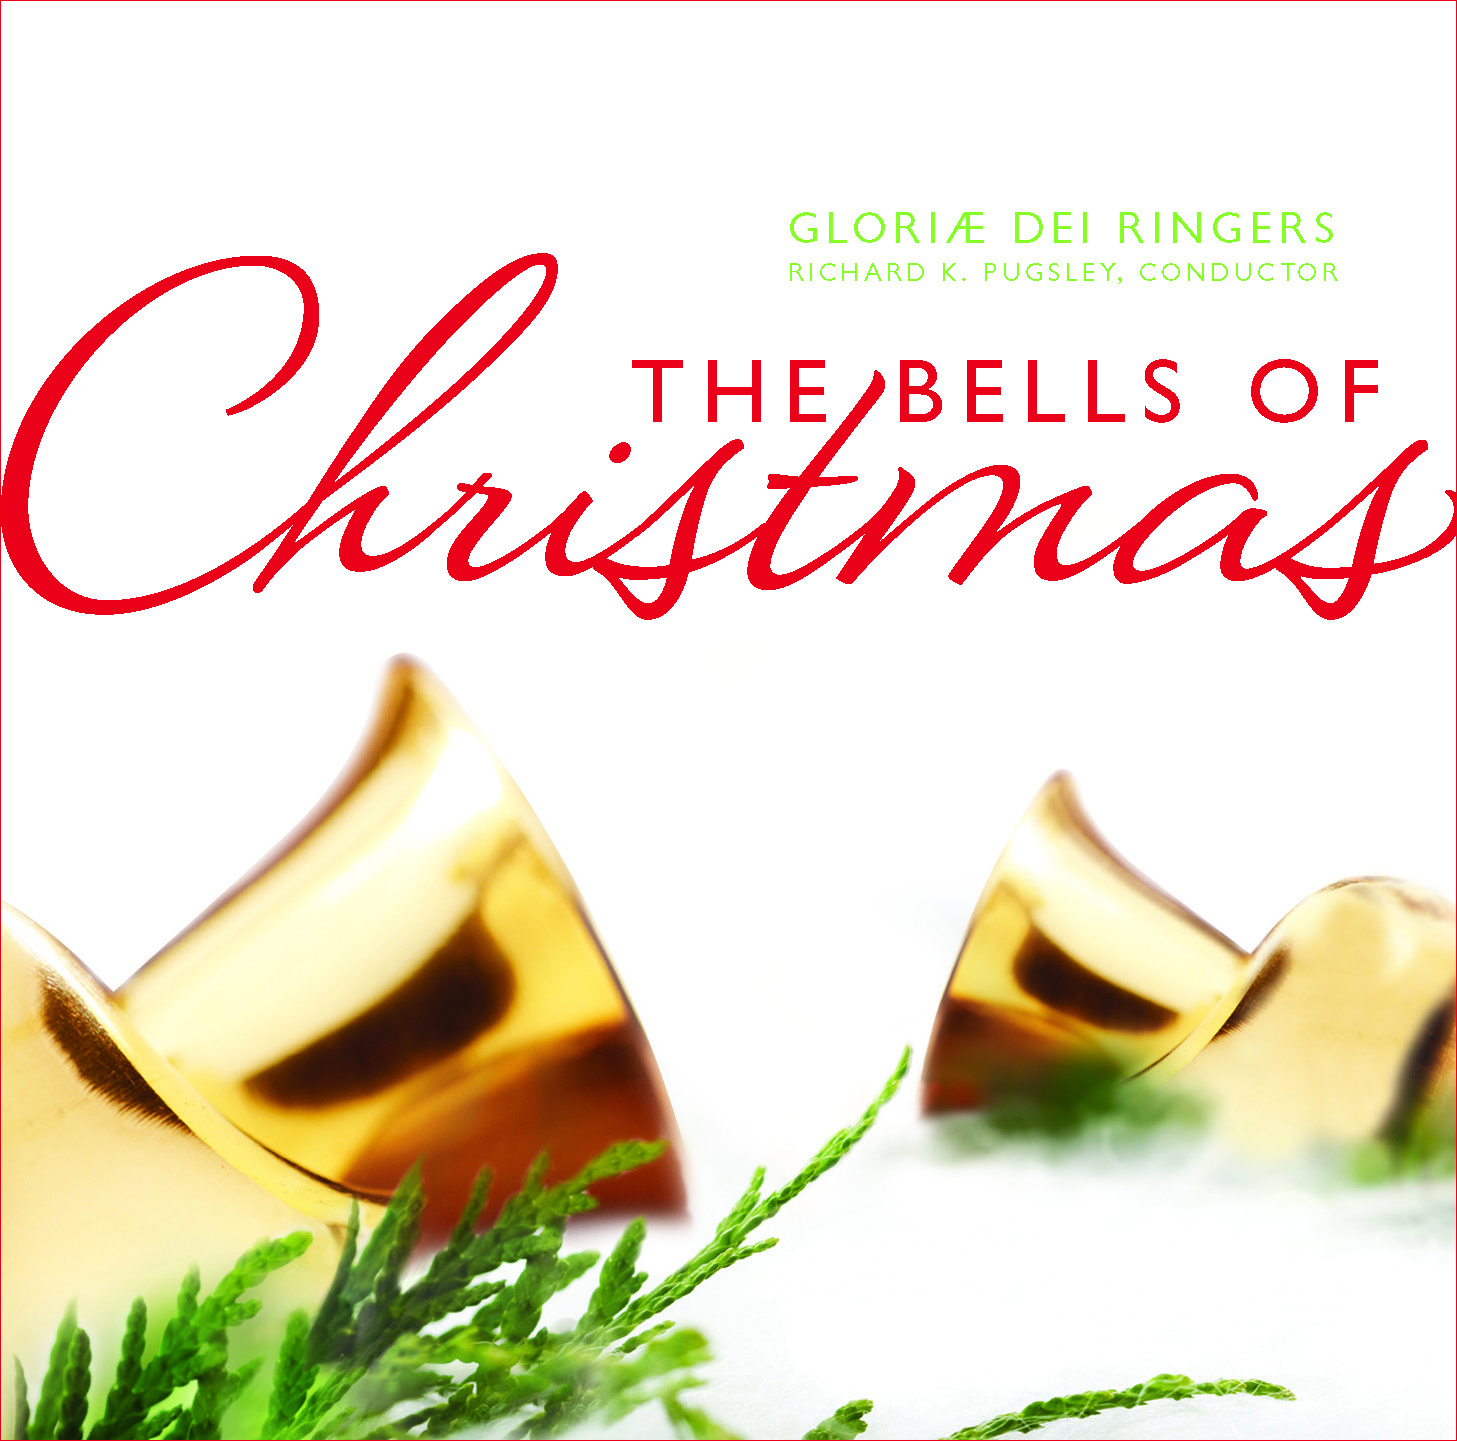 product image of 'The Bells of Christmas' handbell choir recording